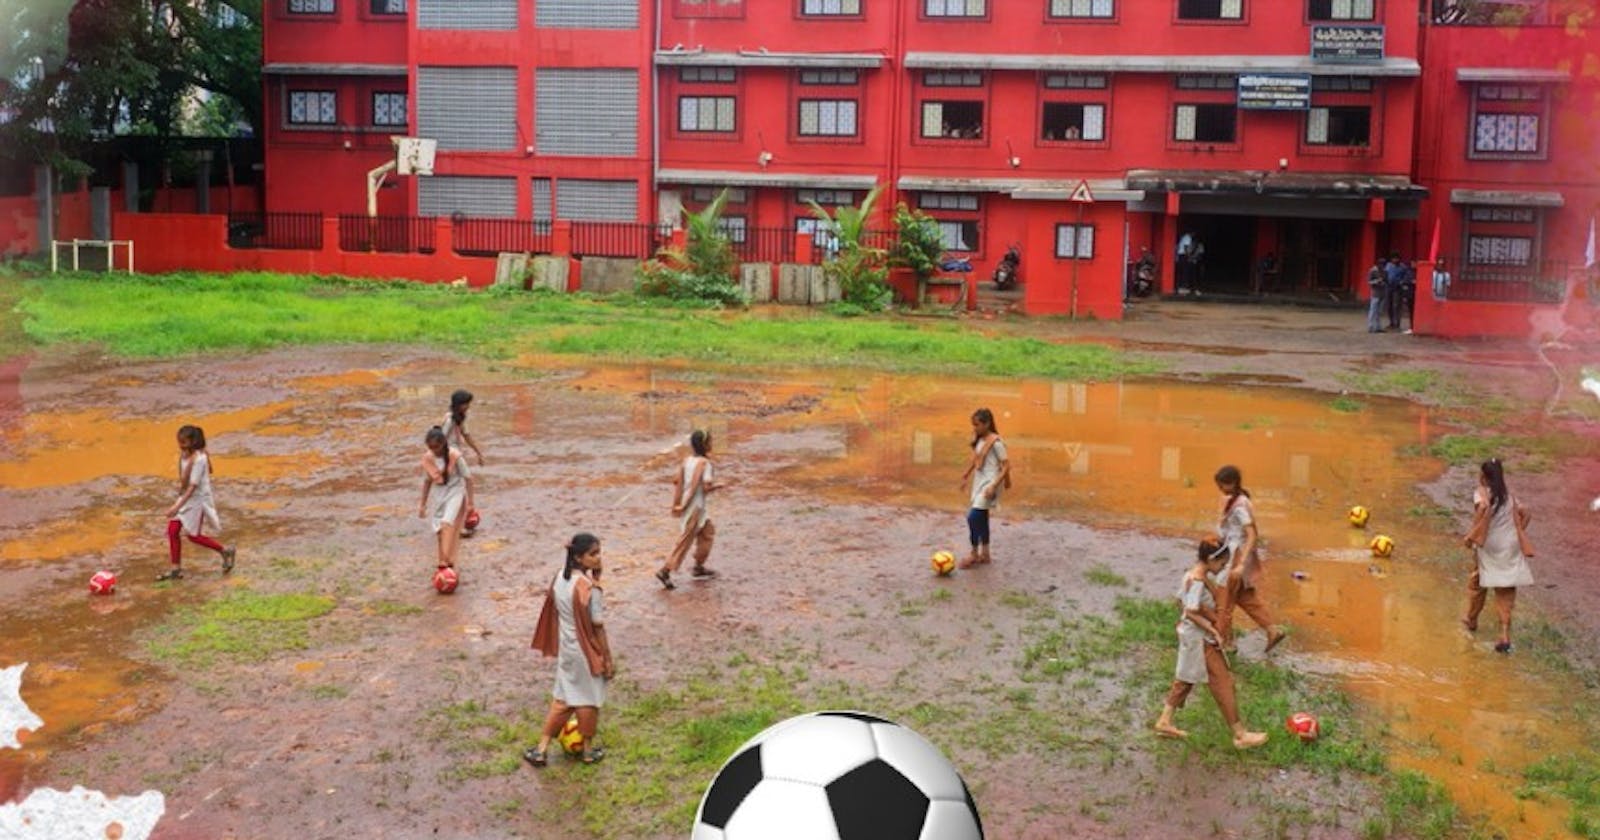 Empowering Girls Through Football: The Rise of Girls' Football Teams